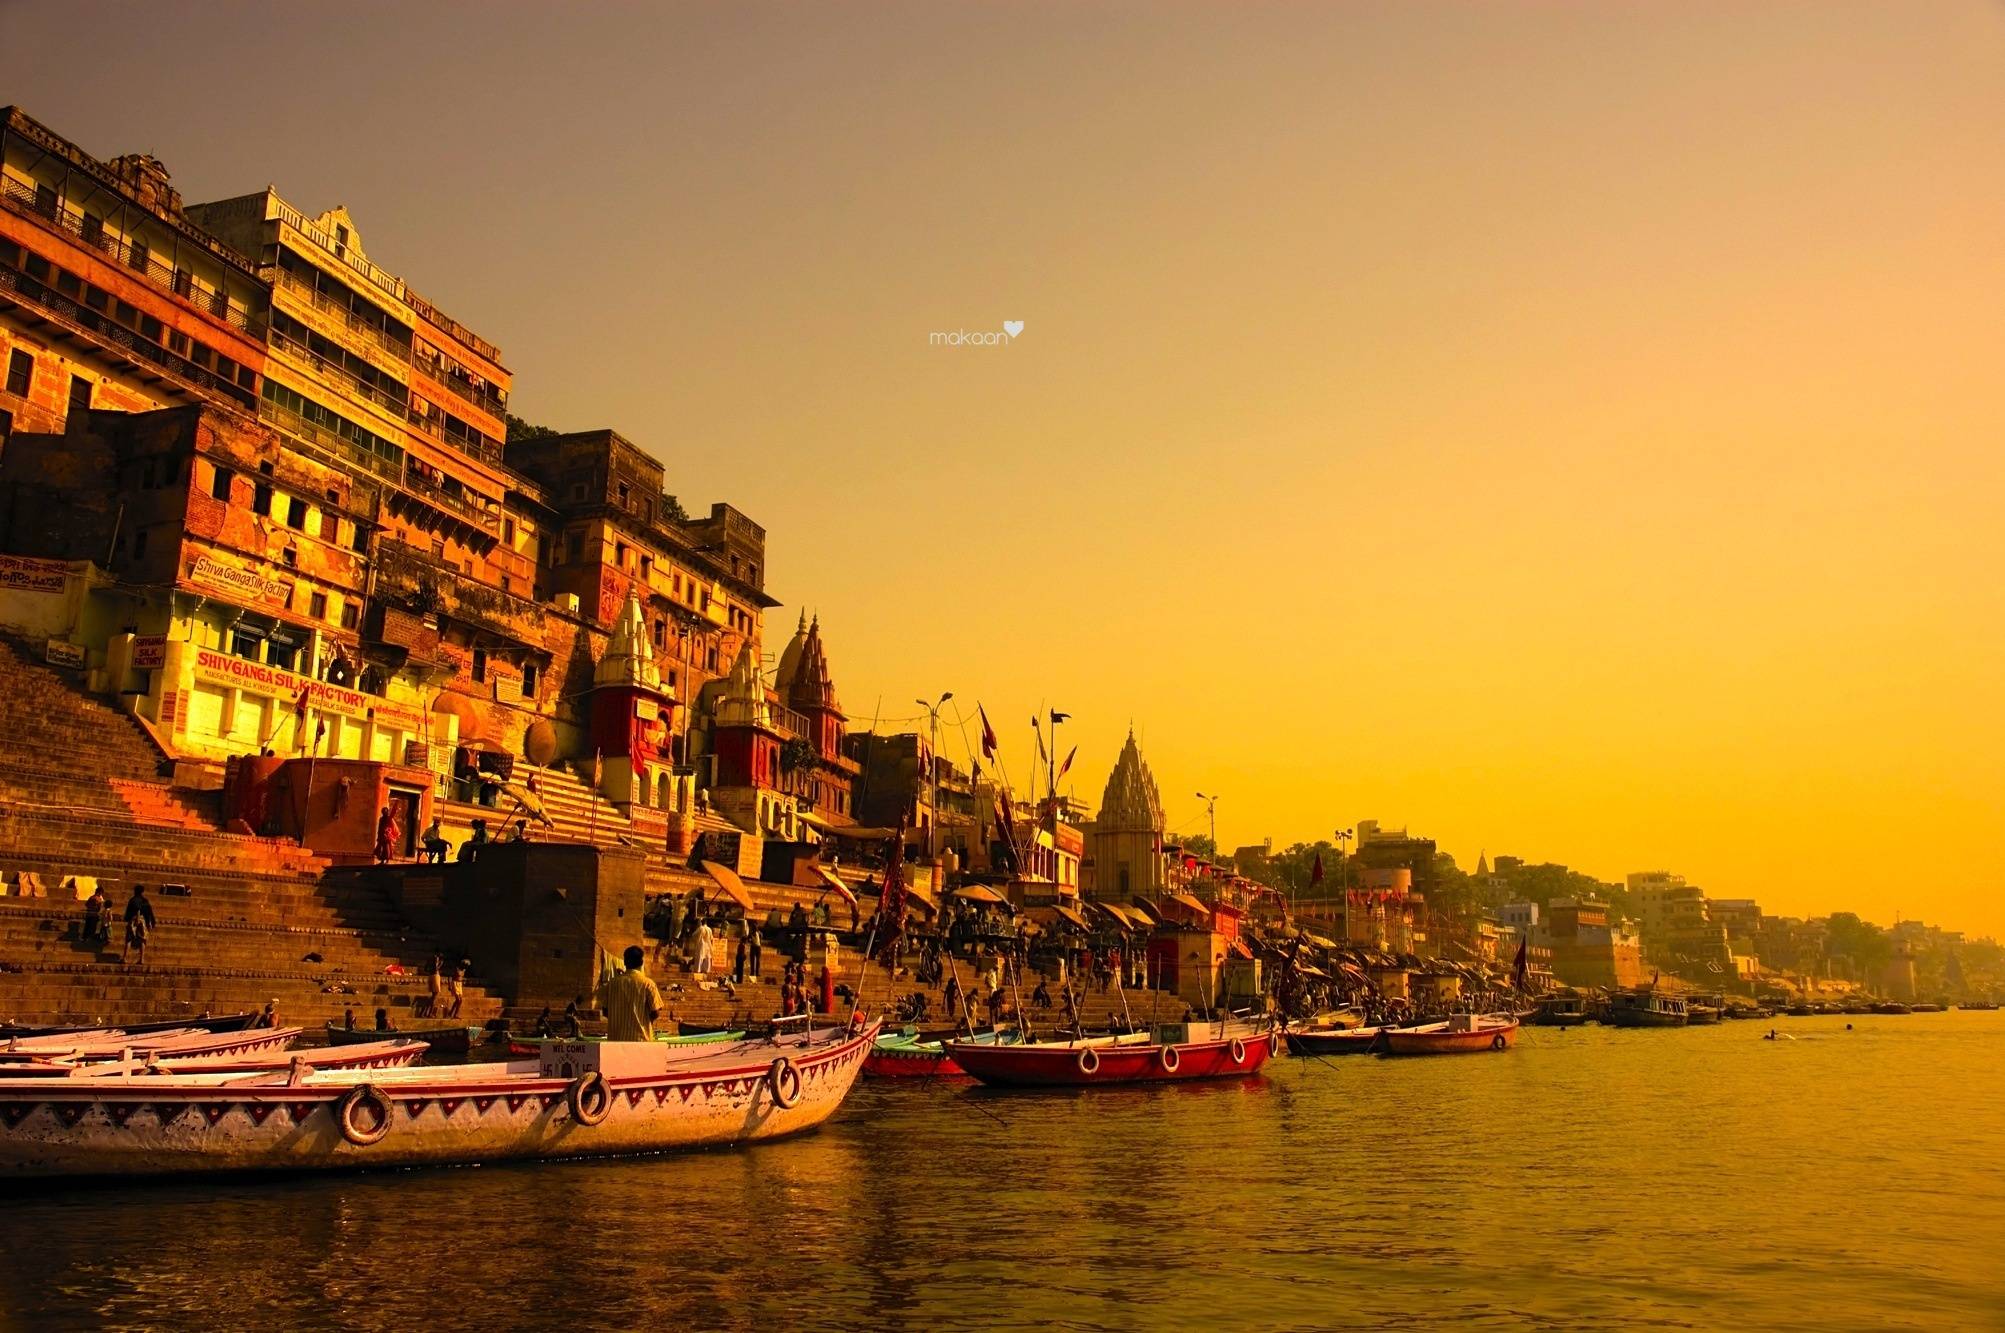 Let the spirituality and the flowing Ganges engulf you